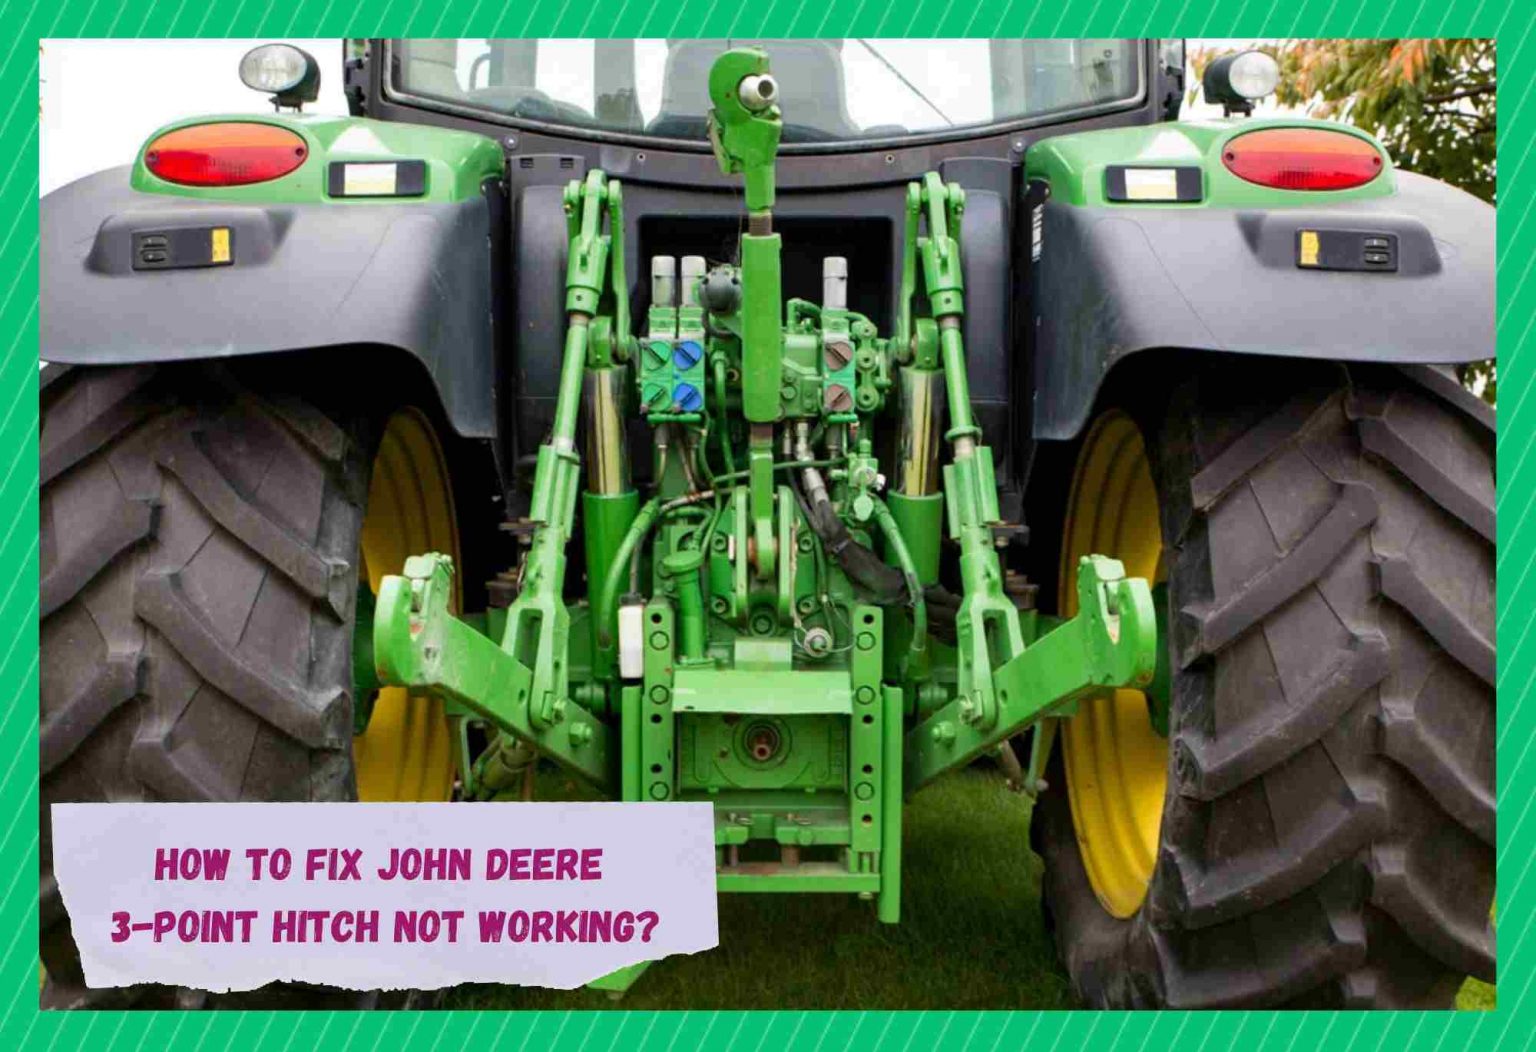 5 Approaches To Fixing John Deere 3 Point Hitch Not Working Farmer Grows